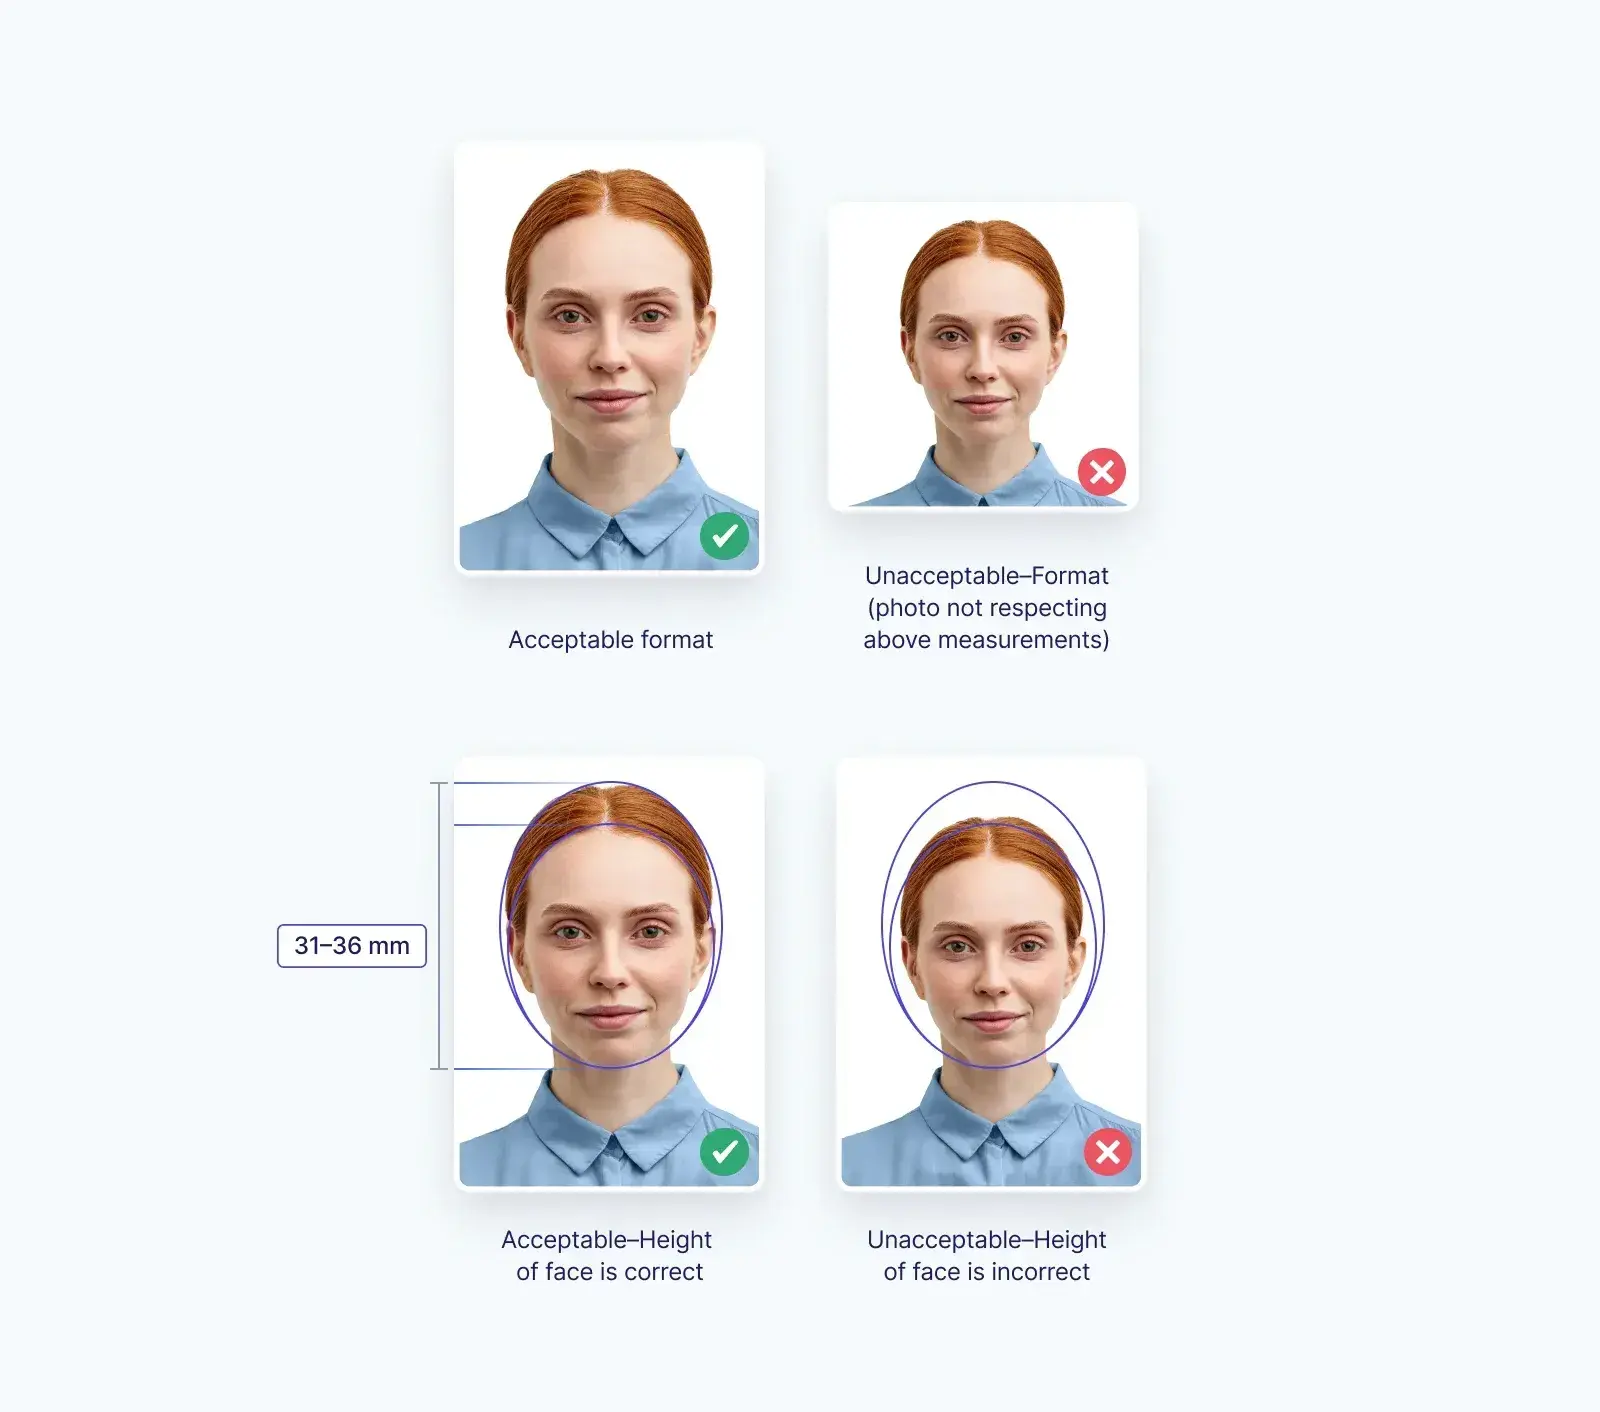 Photo dimensions and head size must conform to specific guidelines in Canadian passport photos.